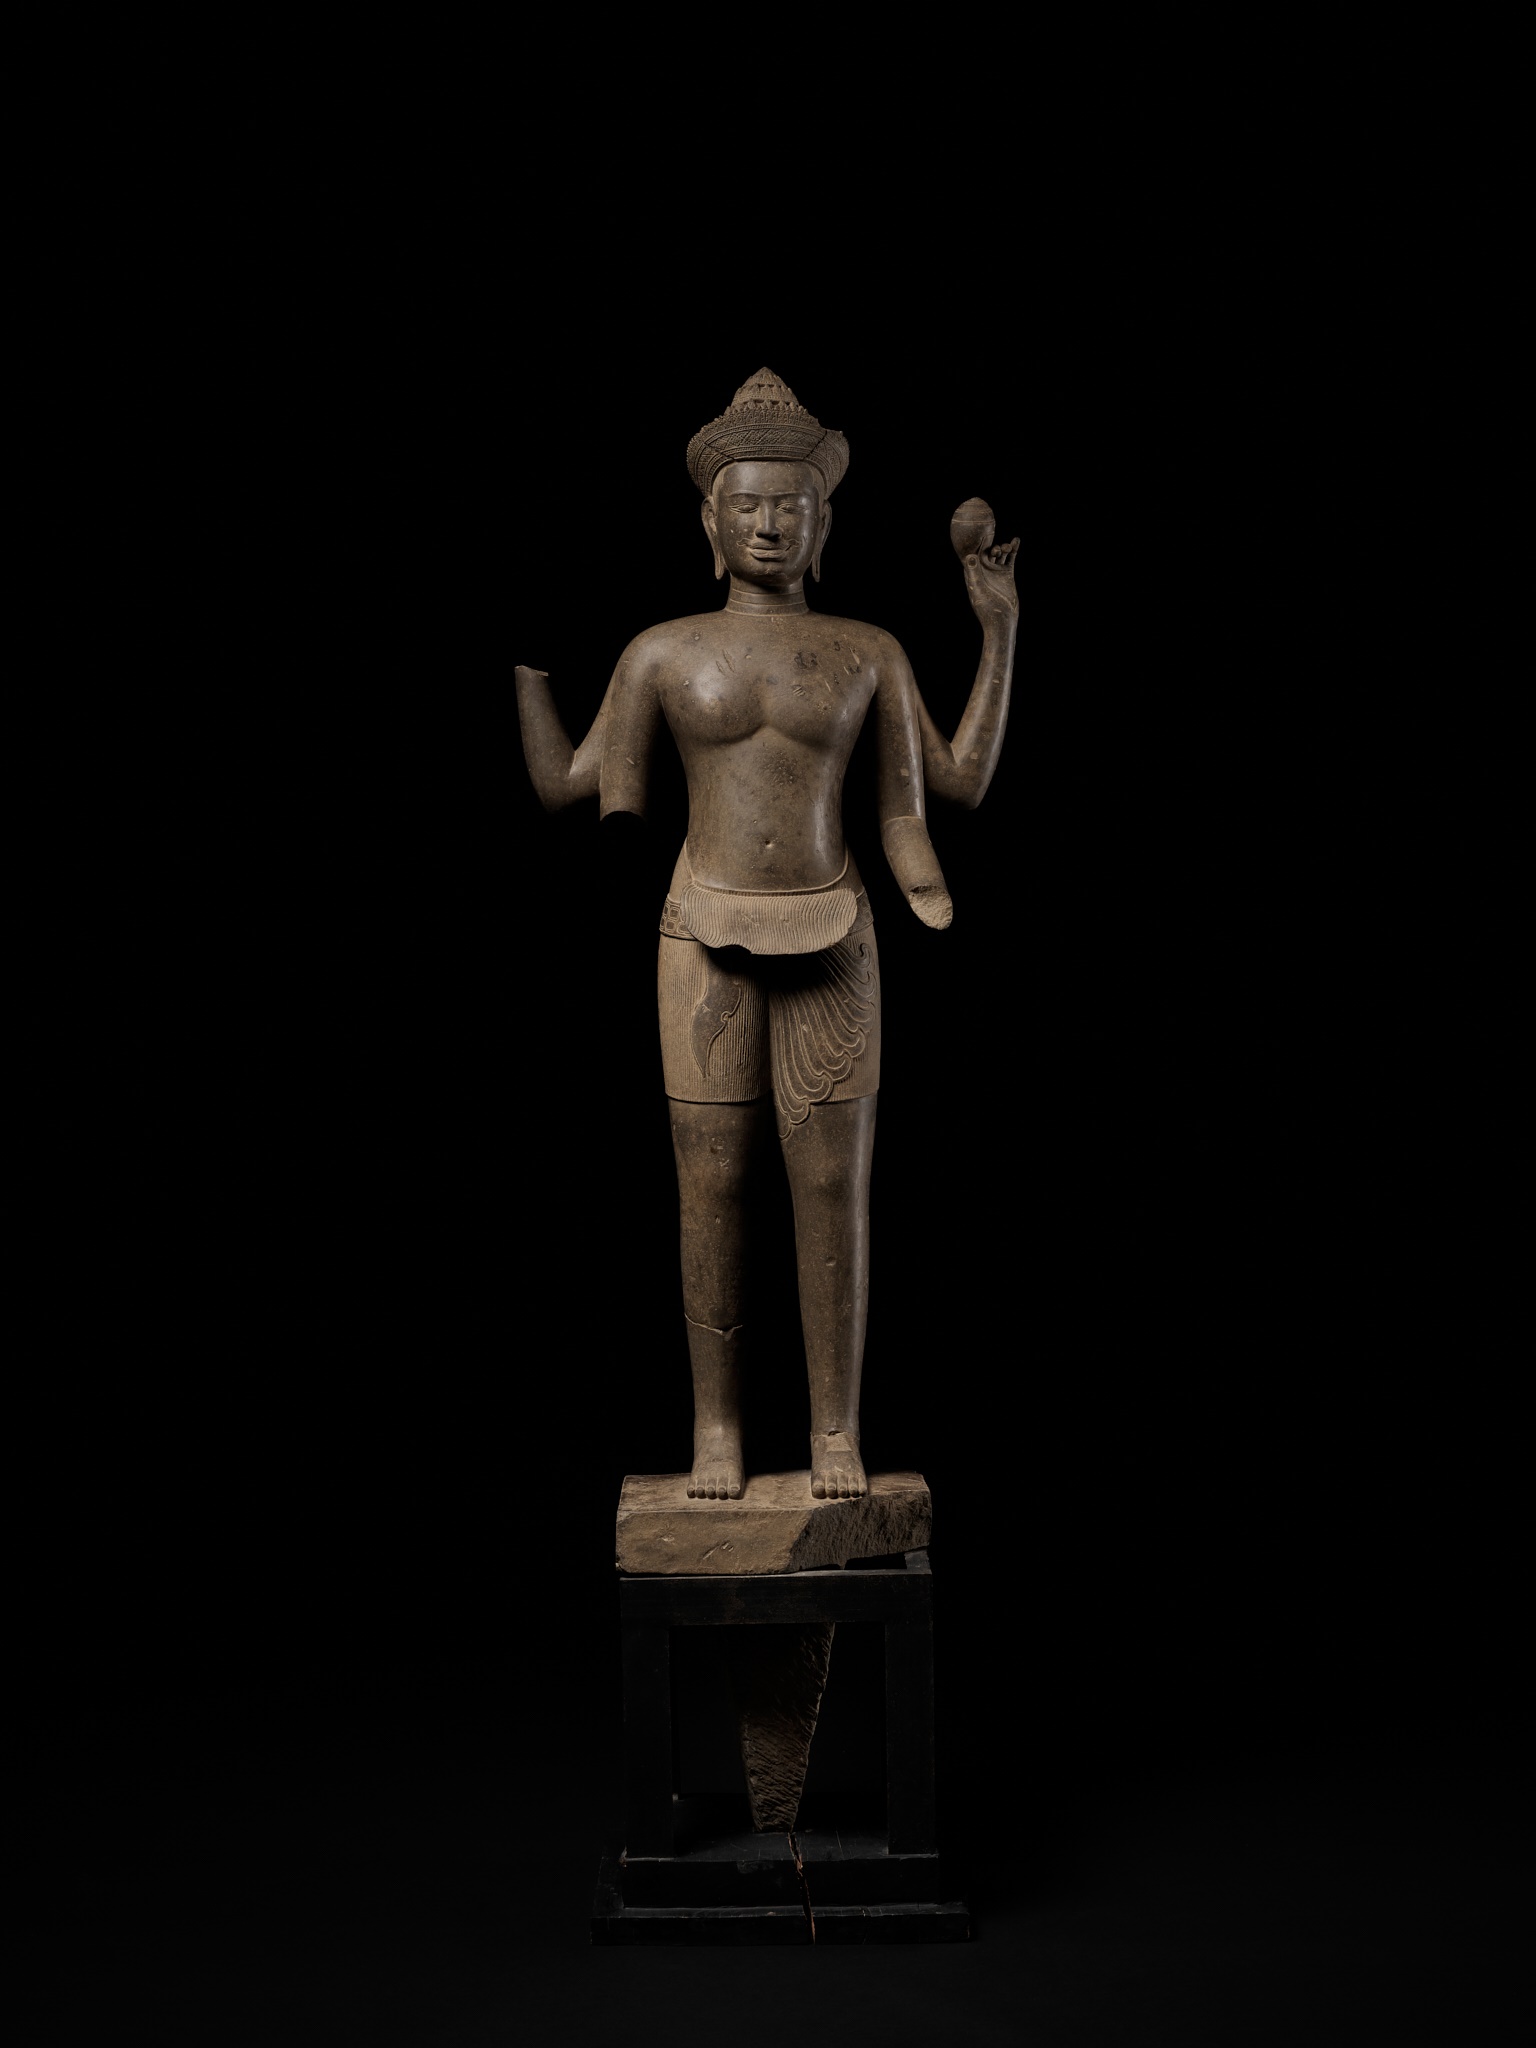 AN EXTREMELY RARE AND MONUMENTAL SANDSTONE STATUE OF VISHNU, ANGKOR PERIOD - Image 3 of 17